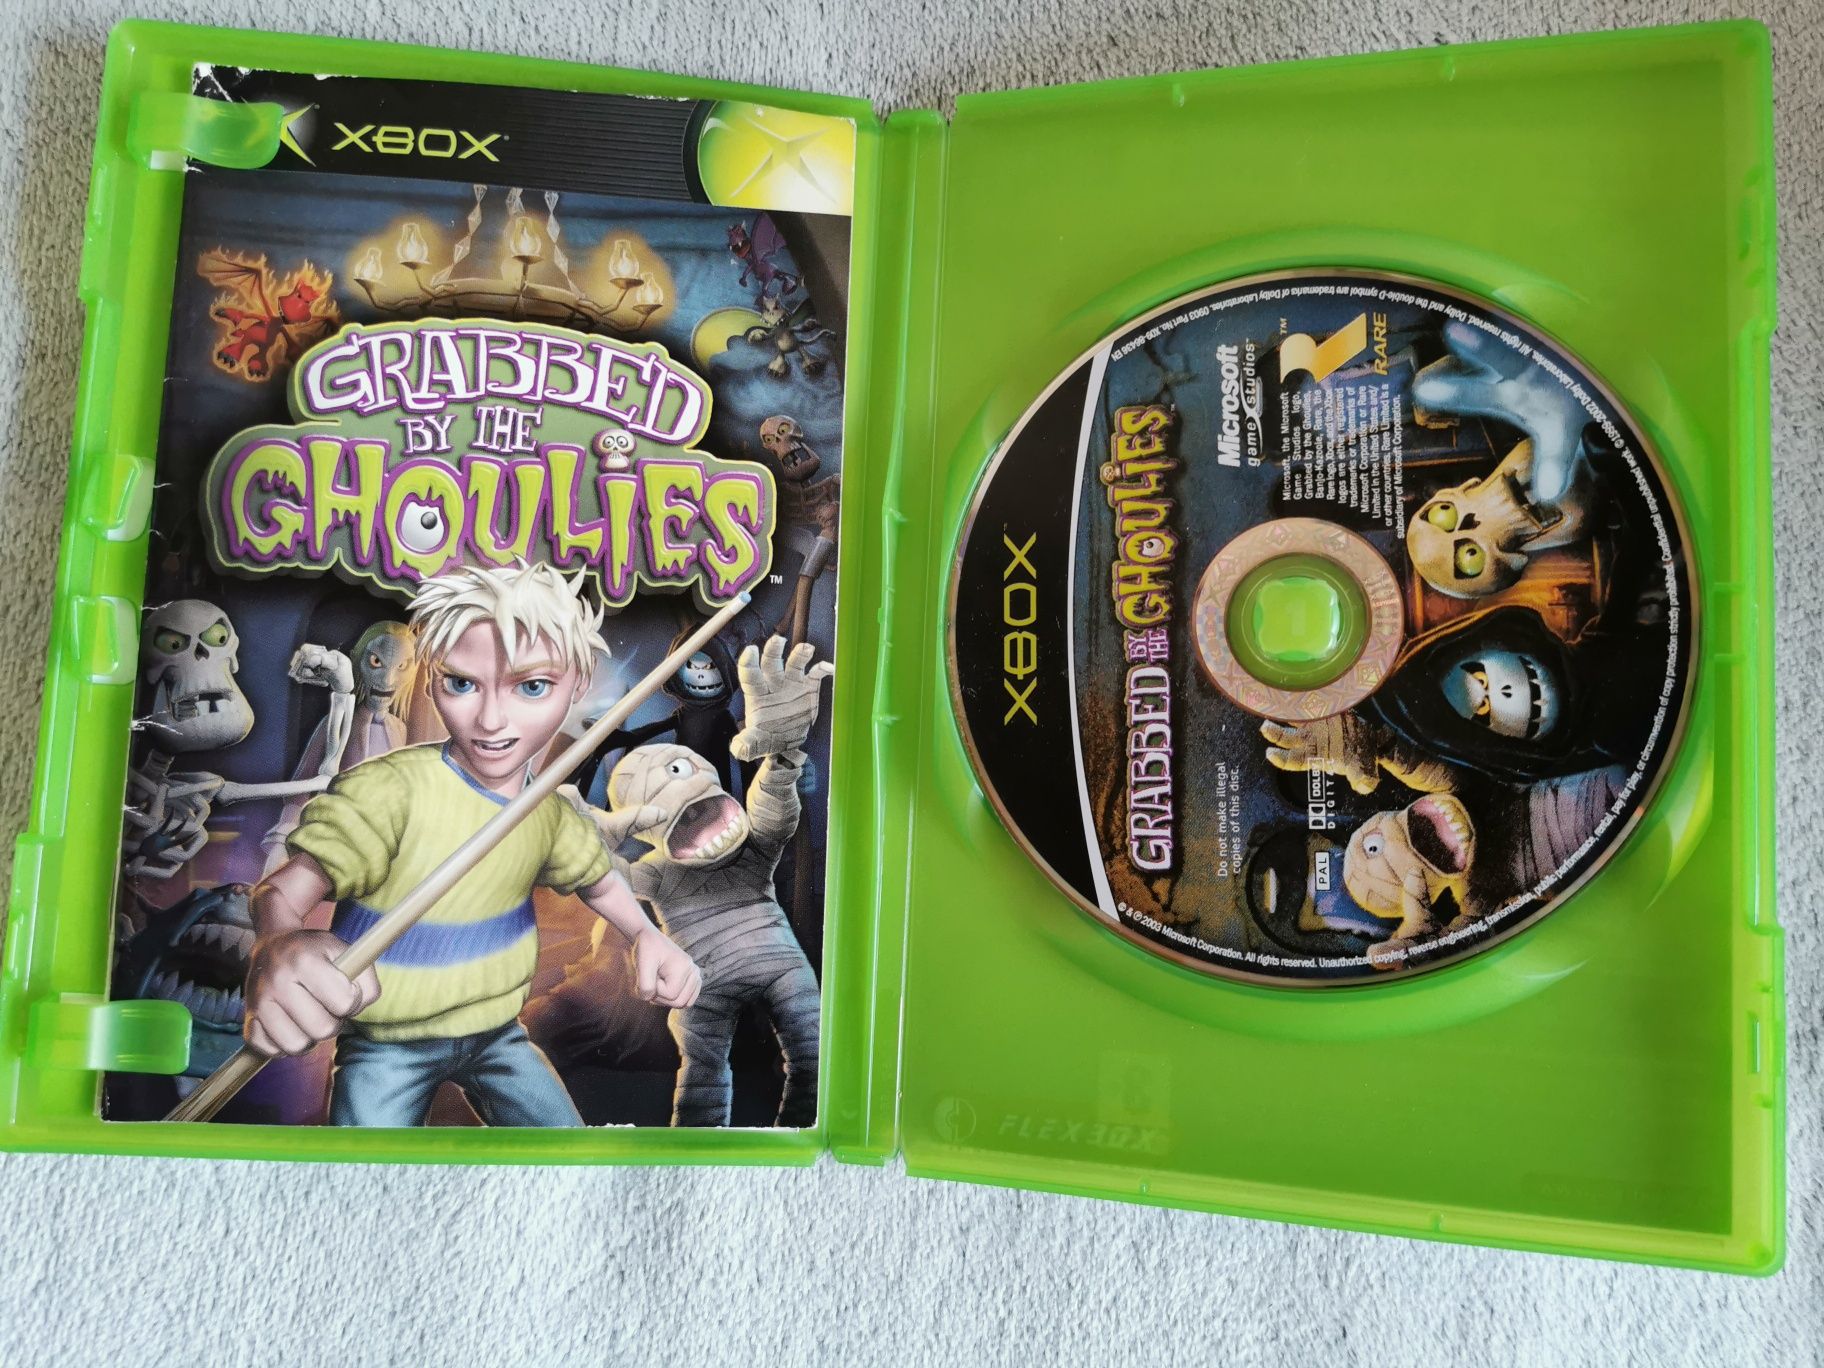 *Xbox Classic* Grabbed by the Ghoulies